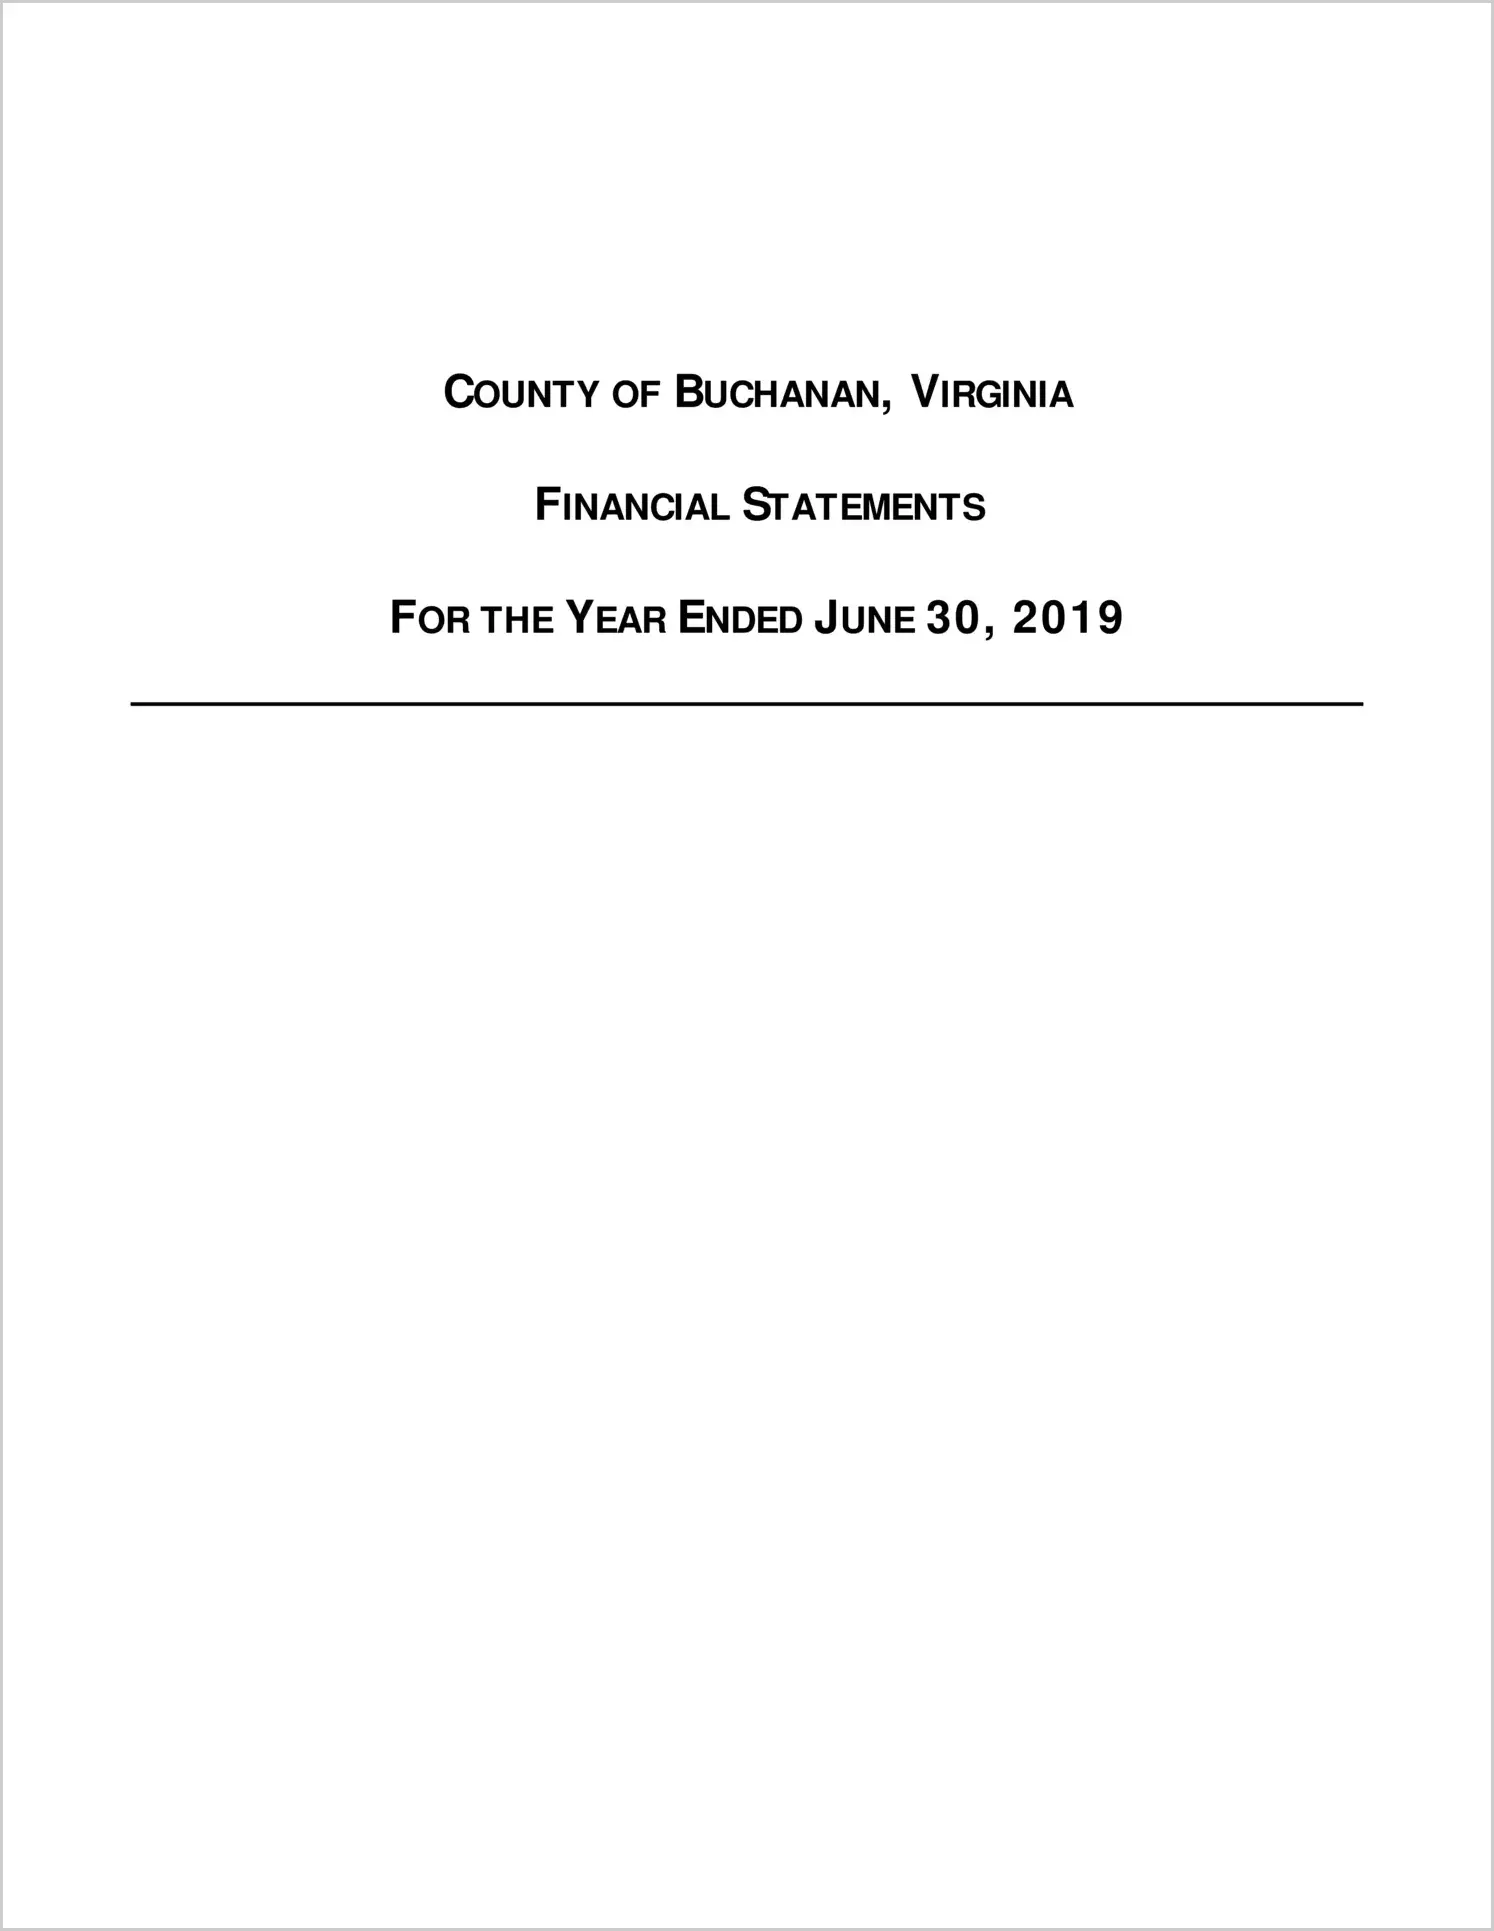 2019 Annual Financial Report for County of Buchanan